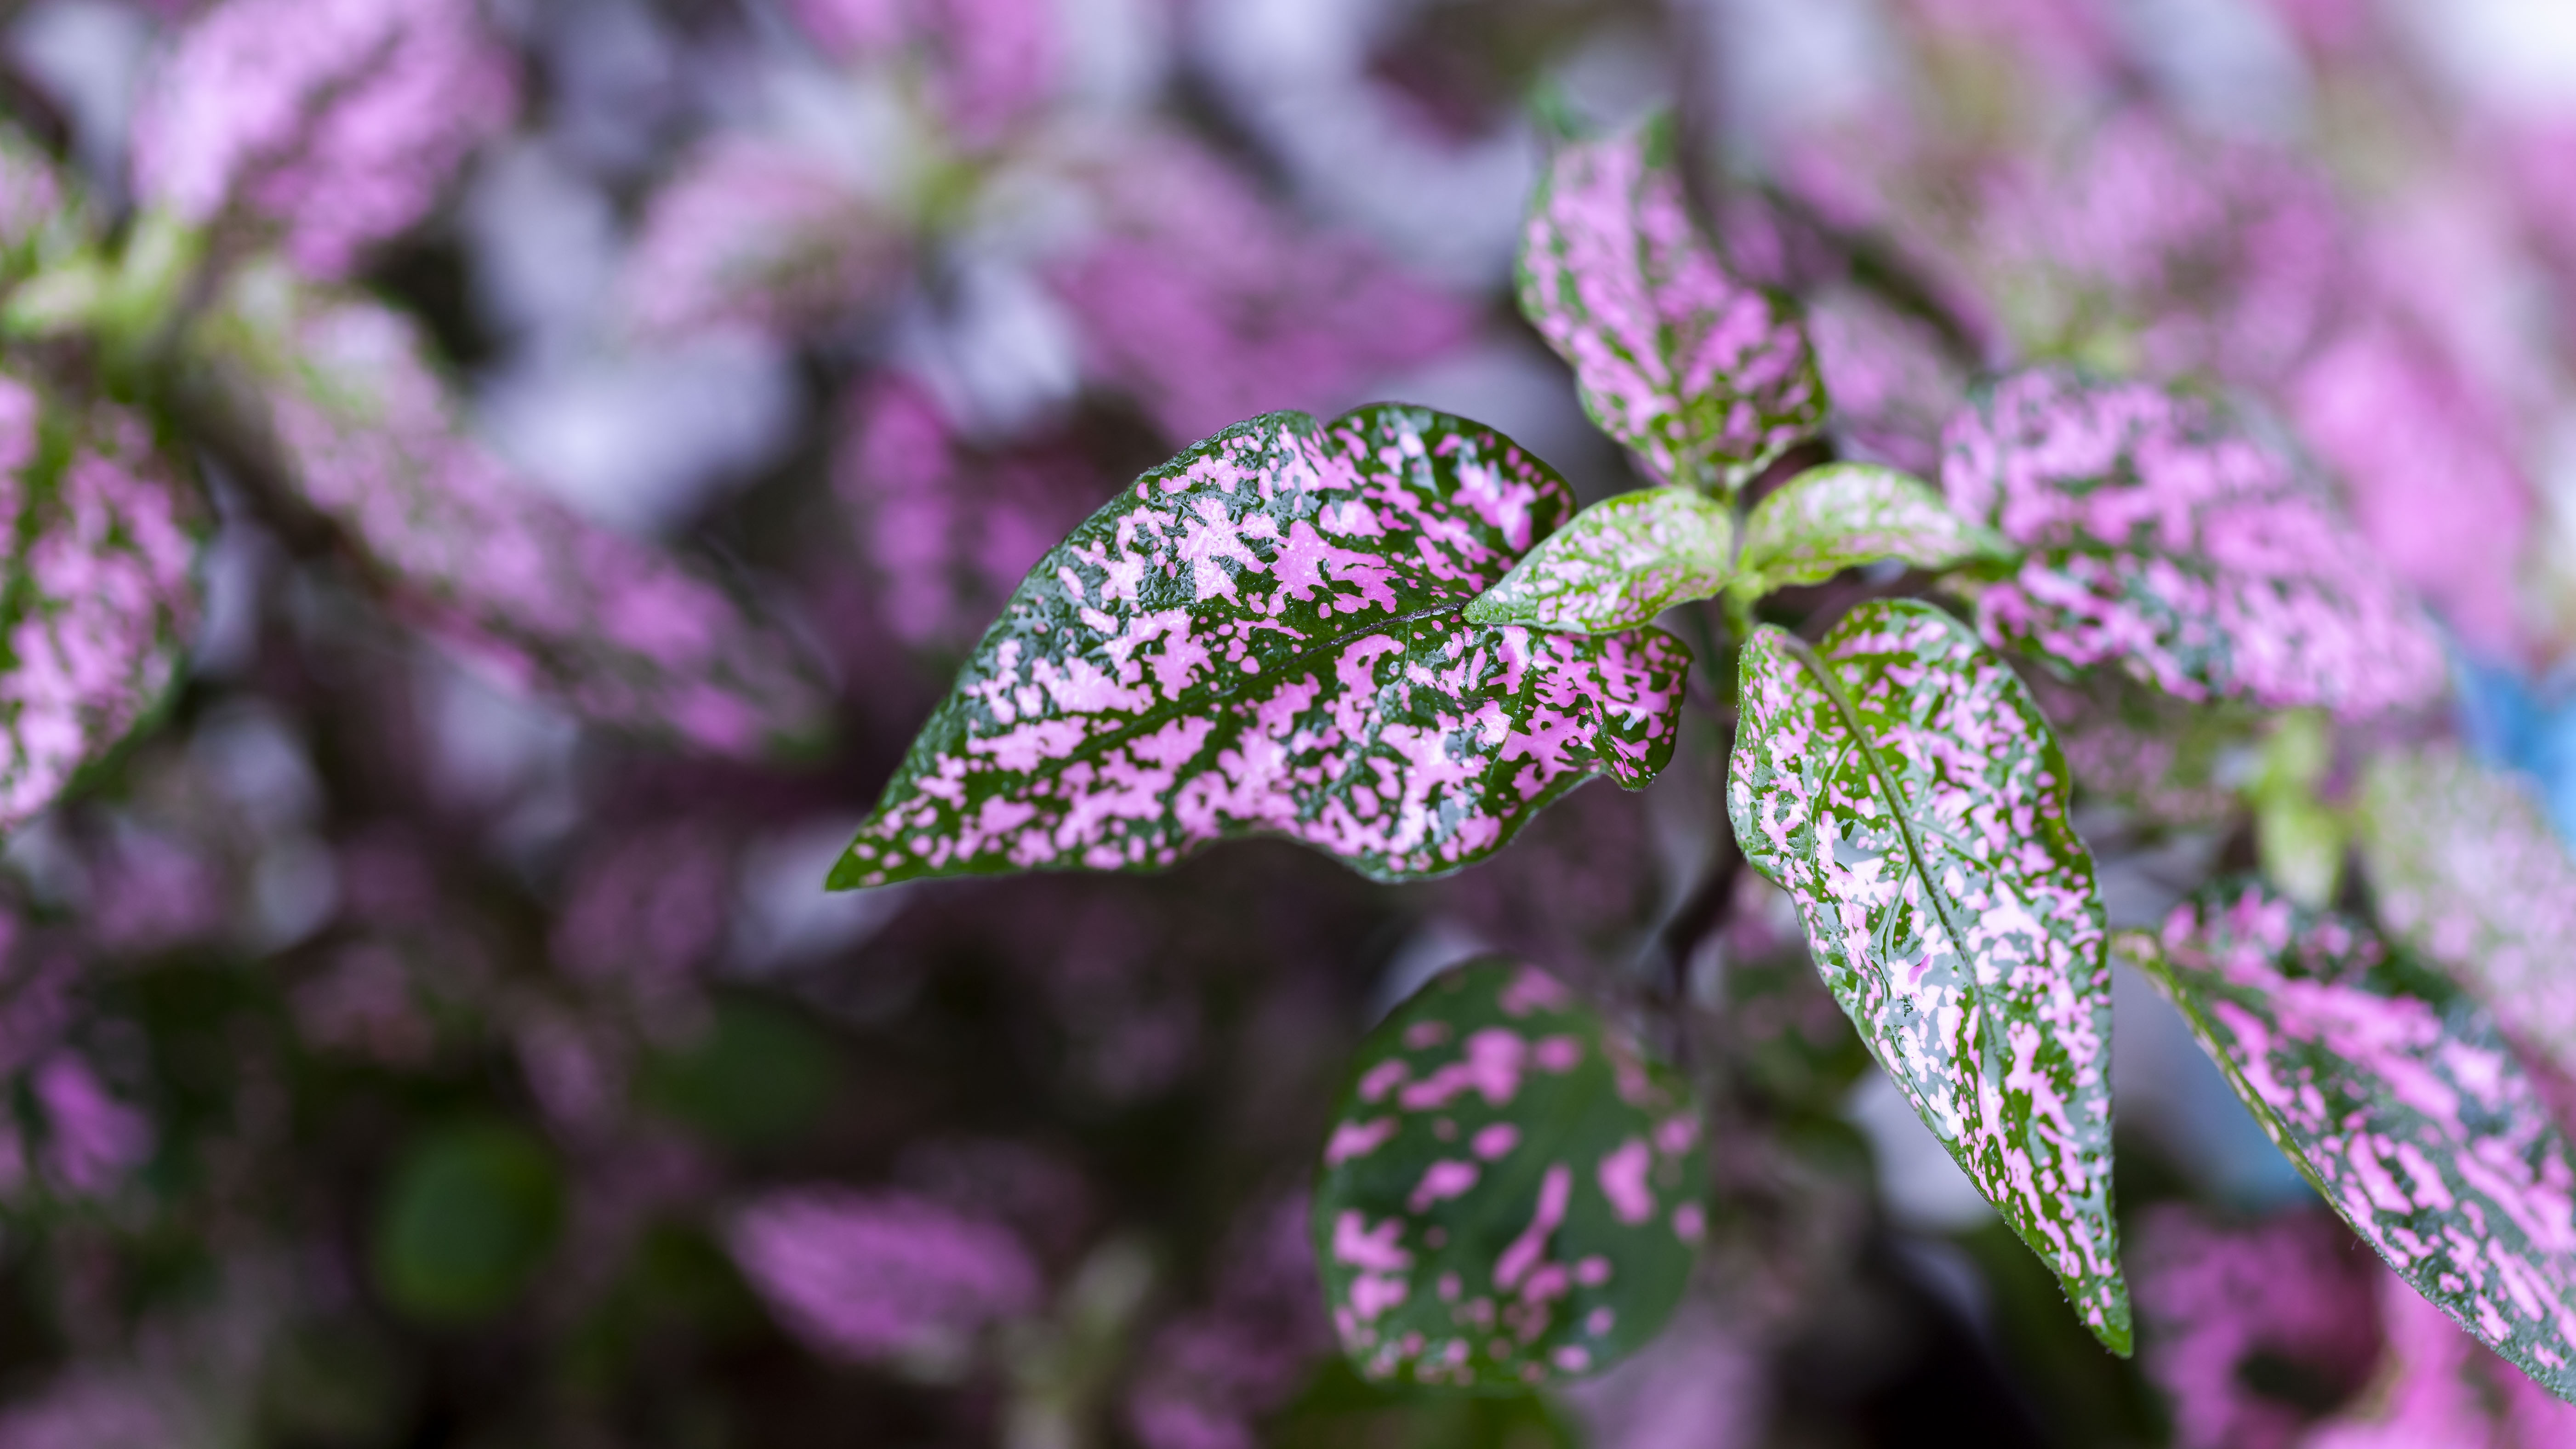 General 5604x3152 plants photography closeup blurred blurry background nature leaves depth of field